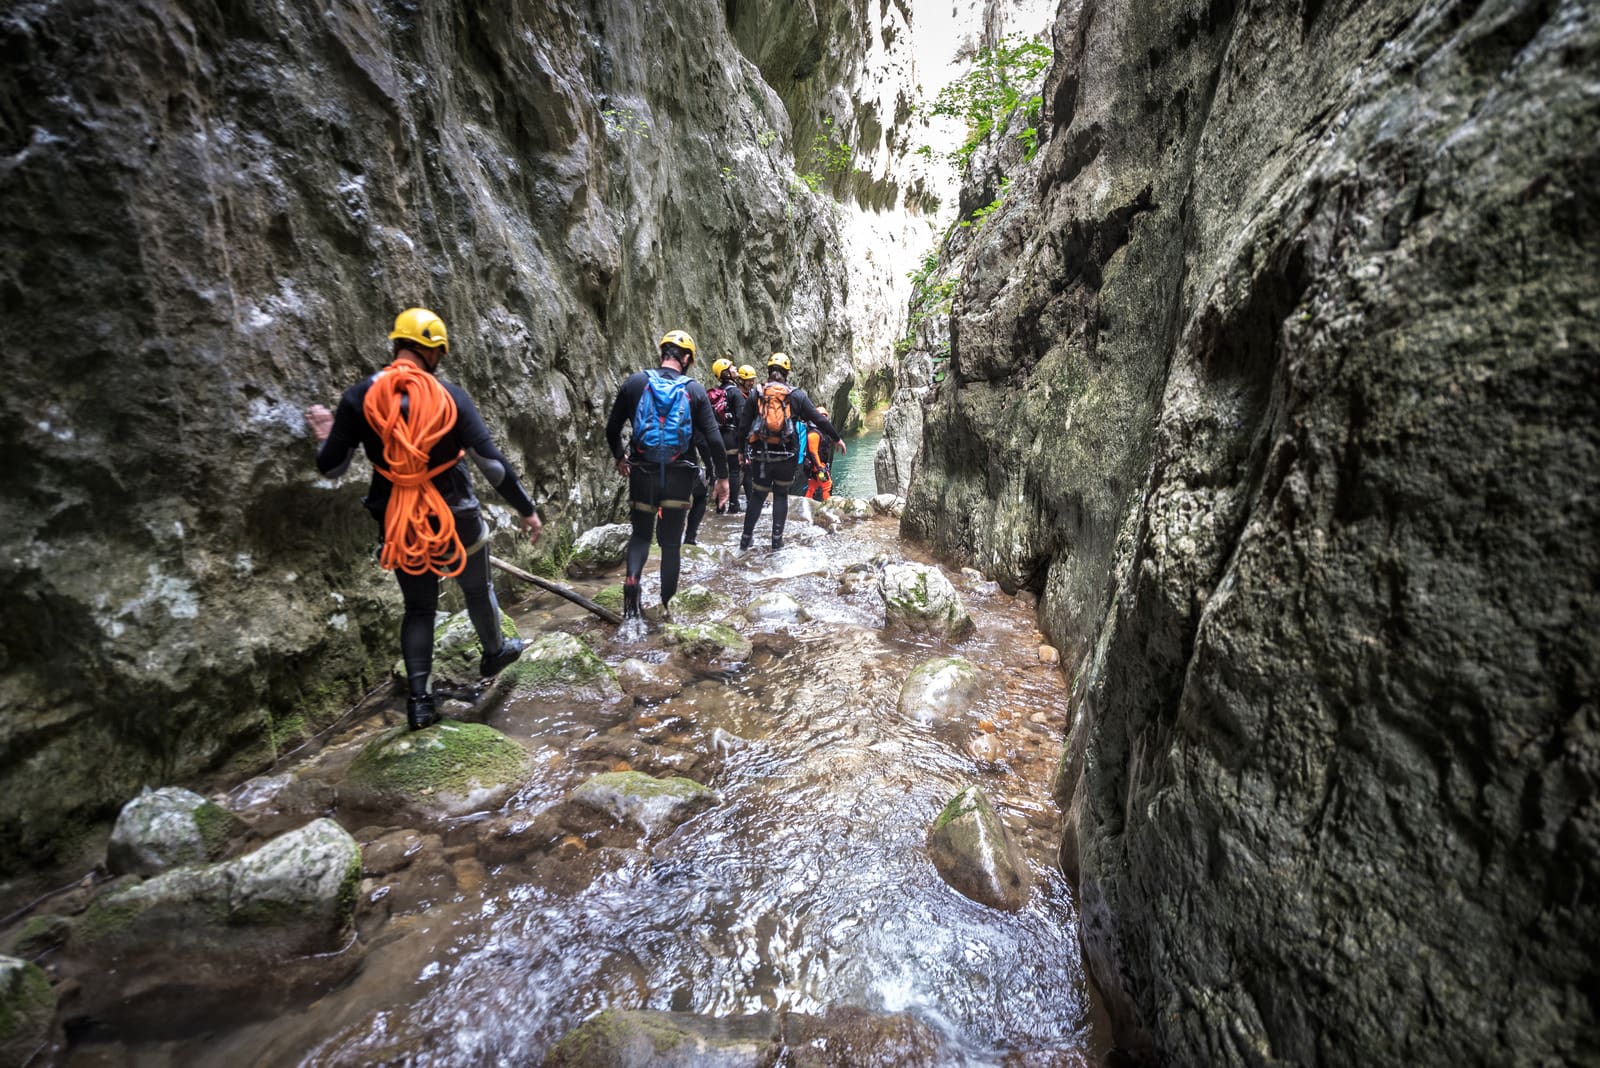 Canyoning team moving through the canyon